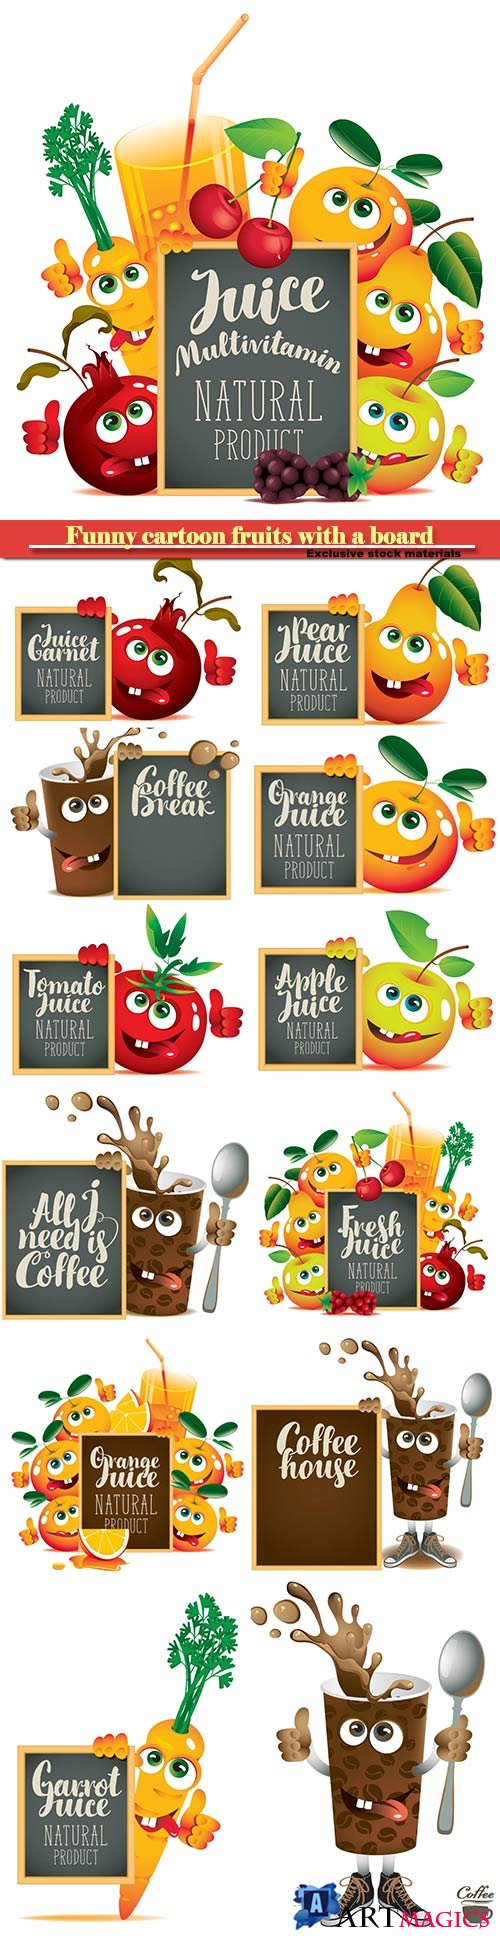 Funny cartoon fruits with a board, coffee and juices